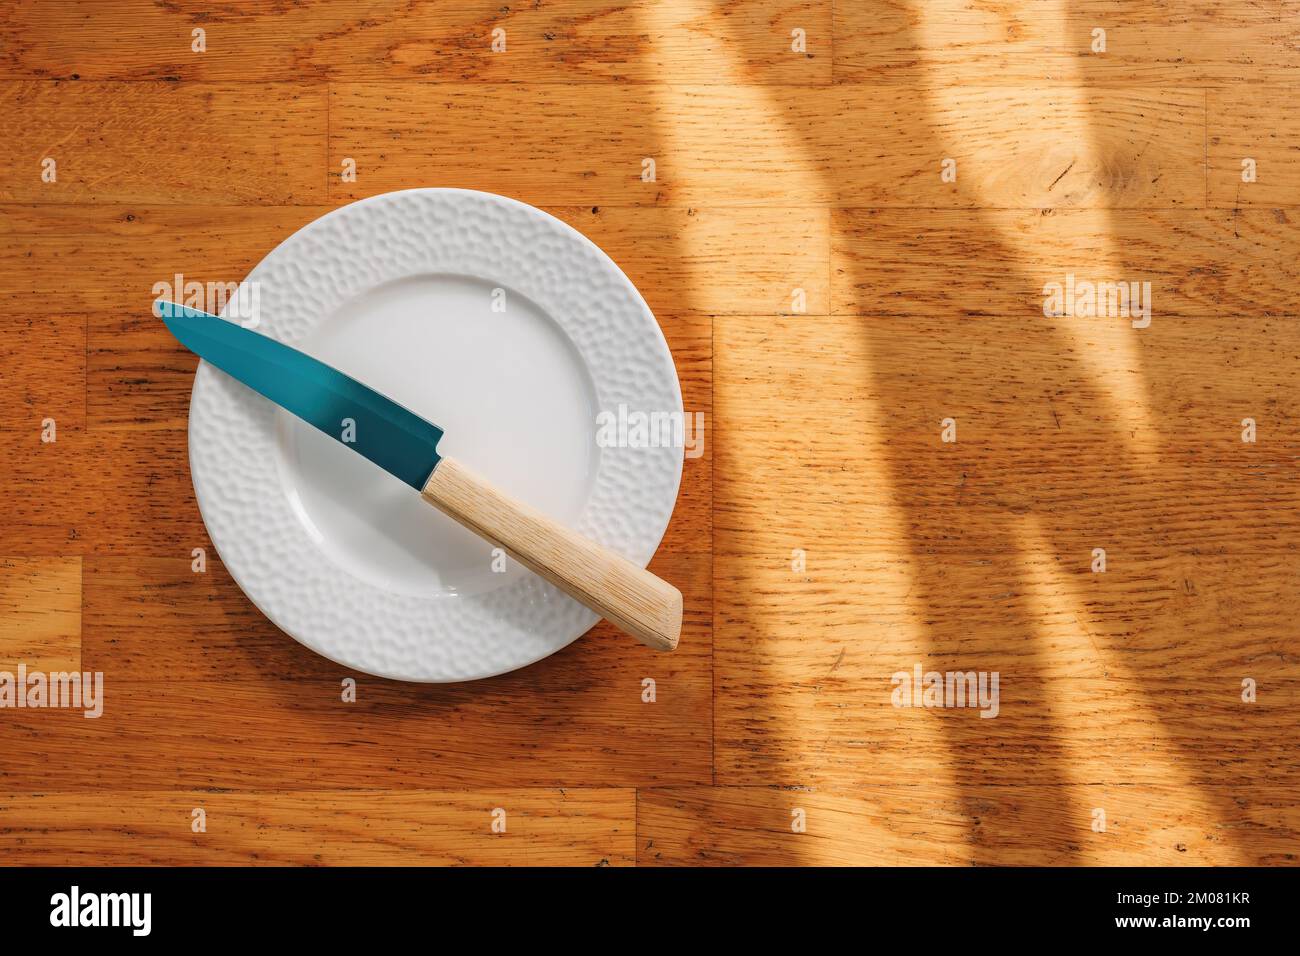 Kitchen knife and empty plate on wooden background, top view Stock Photo